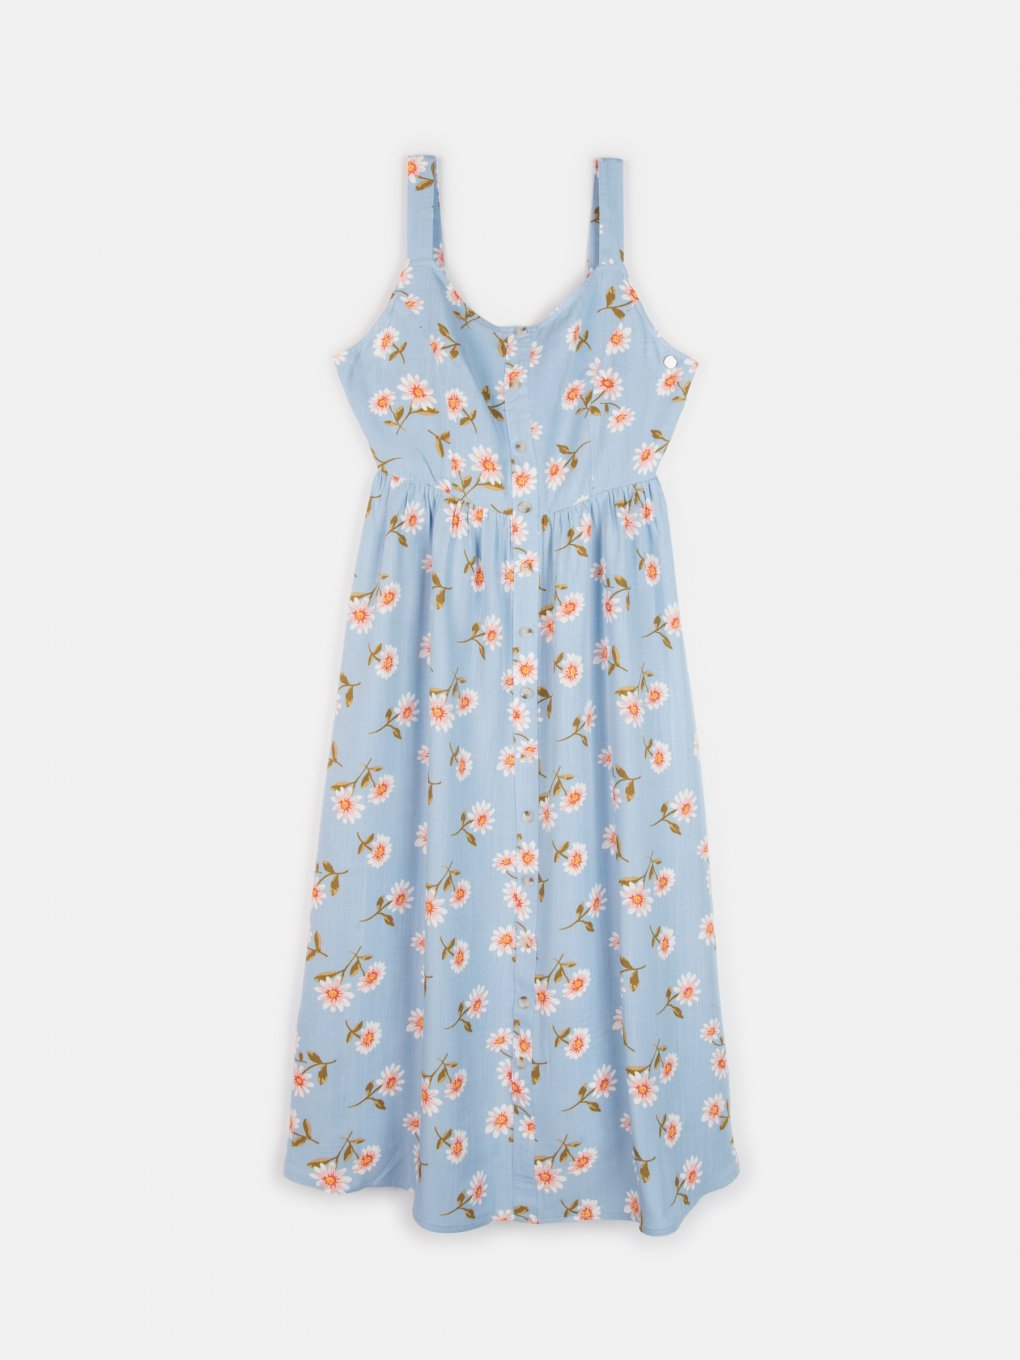 Floral dress with buttons